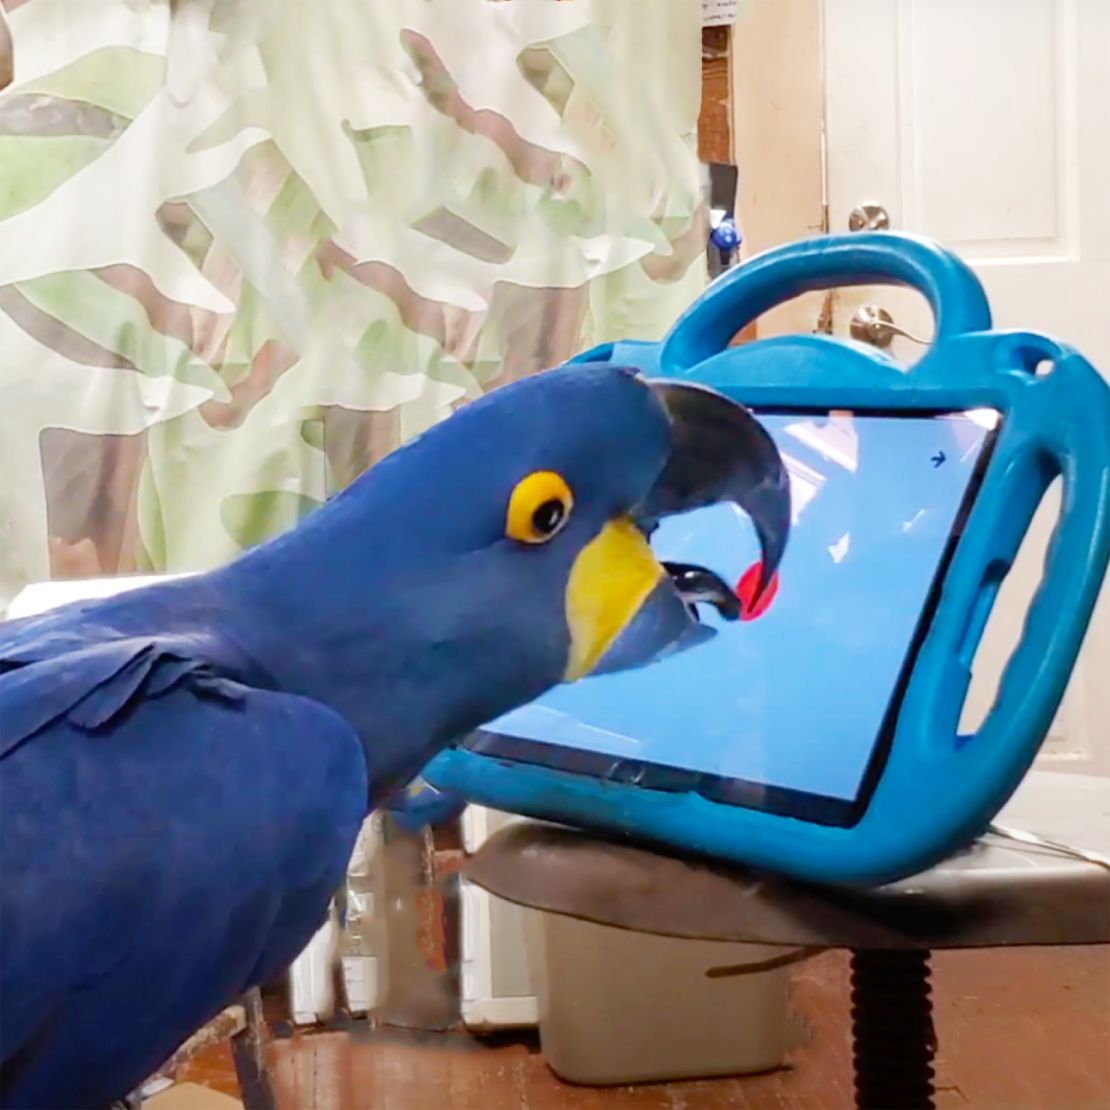 The birds interacted with the tablet for no more than 30 minutes a day.